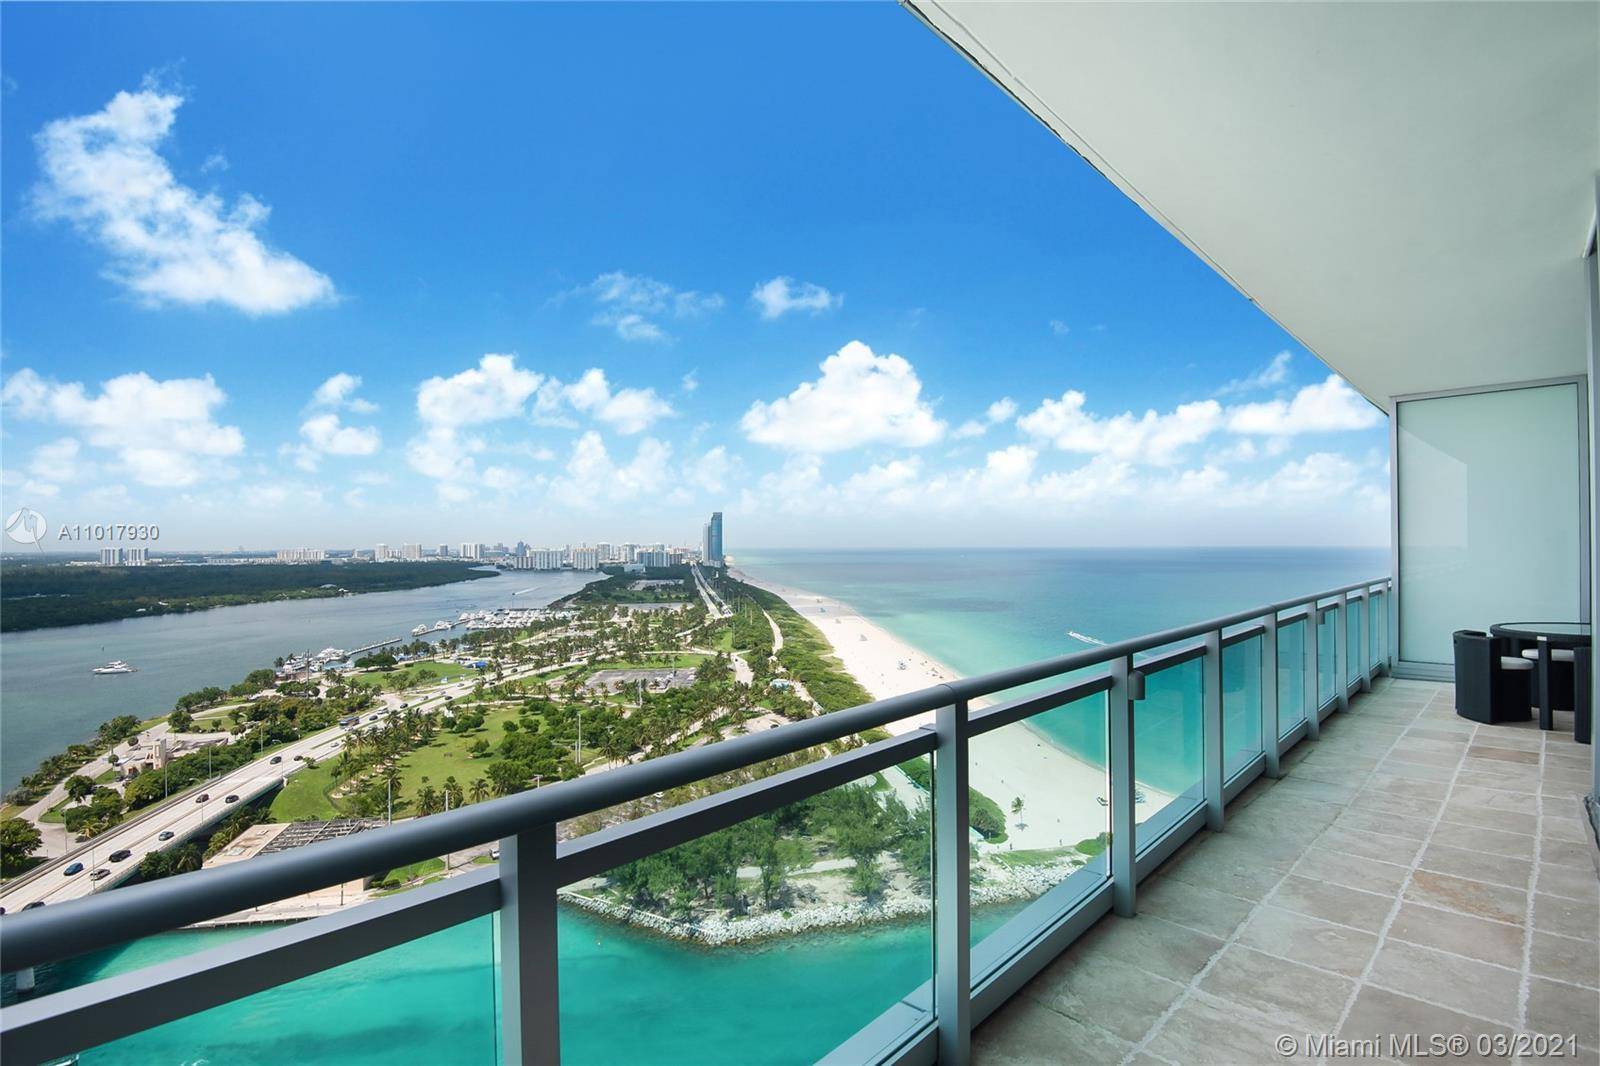 STUNNING HIGH FLOOR, UNOBSTRUCTED ENDLESS VIEWS OF THE OCEAN, INTRACOASTAL AND INLET.